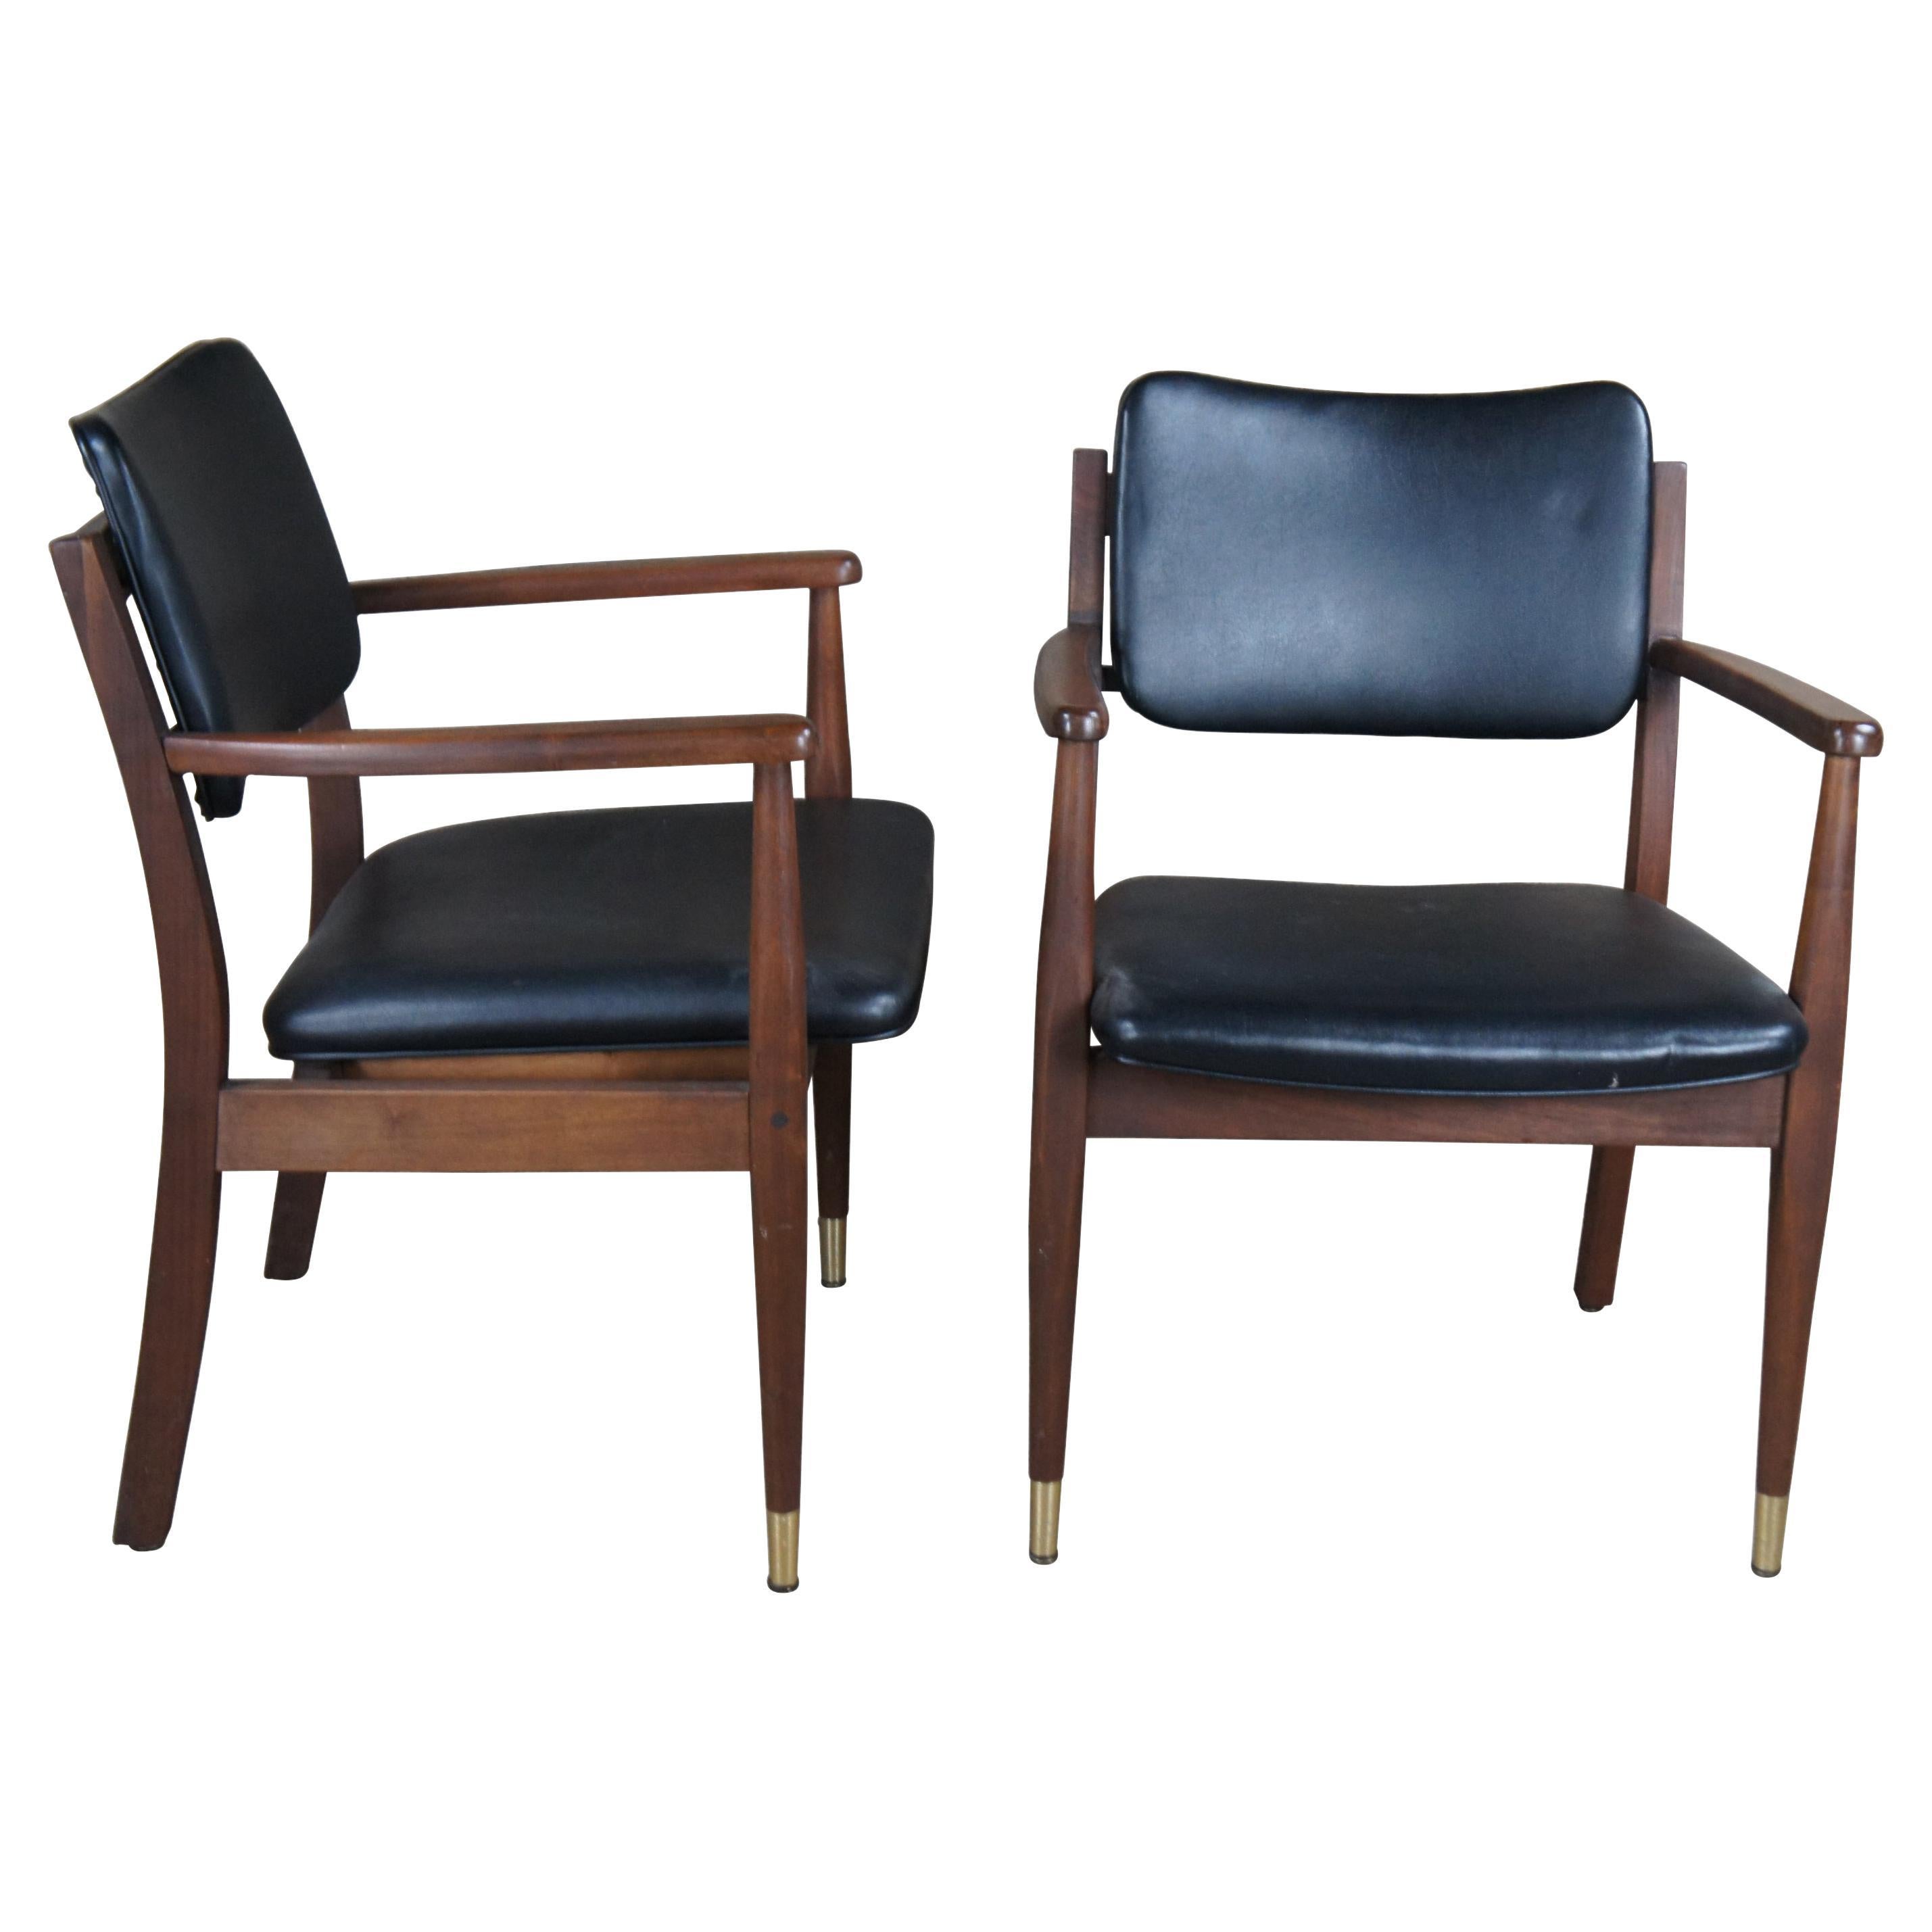 2 Mid Century Modern Gregson Danish Style Walnut & Leather Arms Chairs MCM Pair For Sale